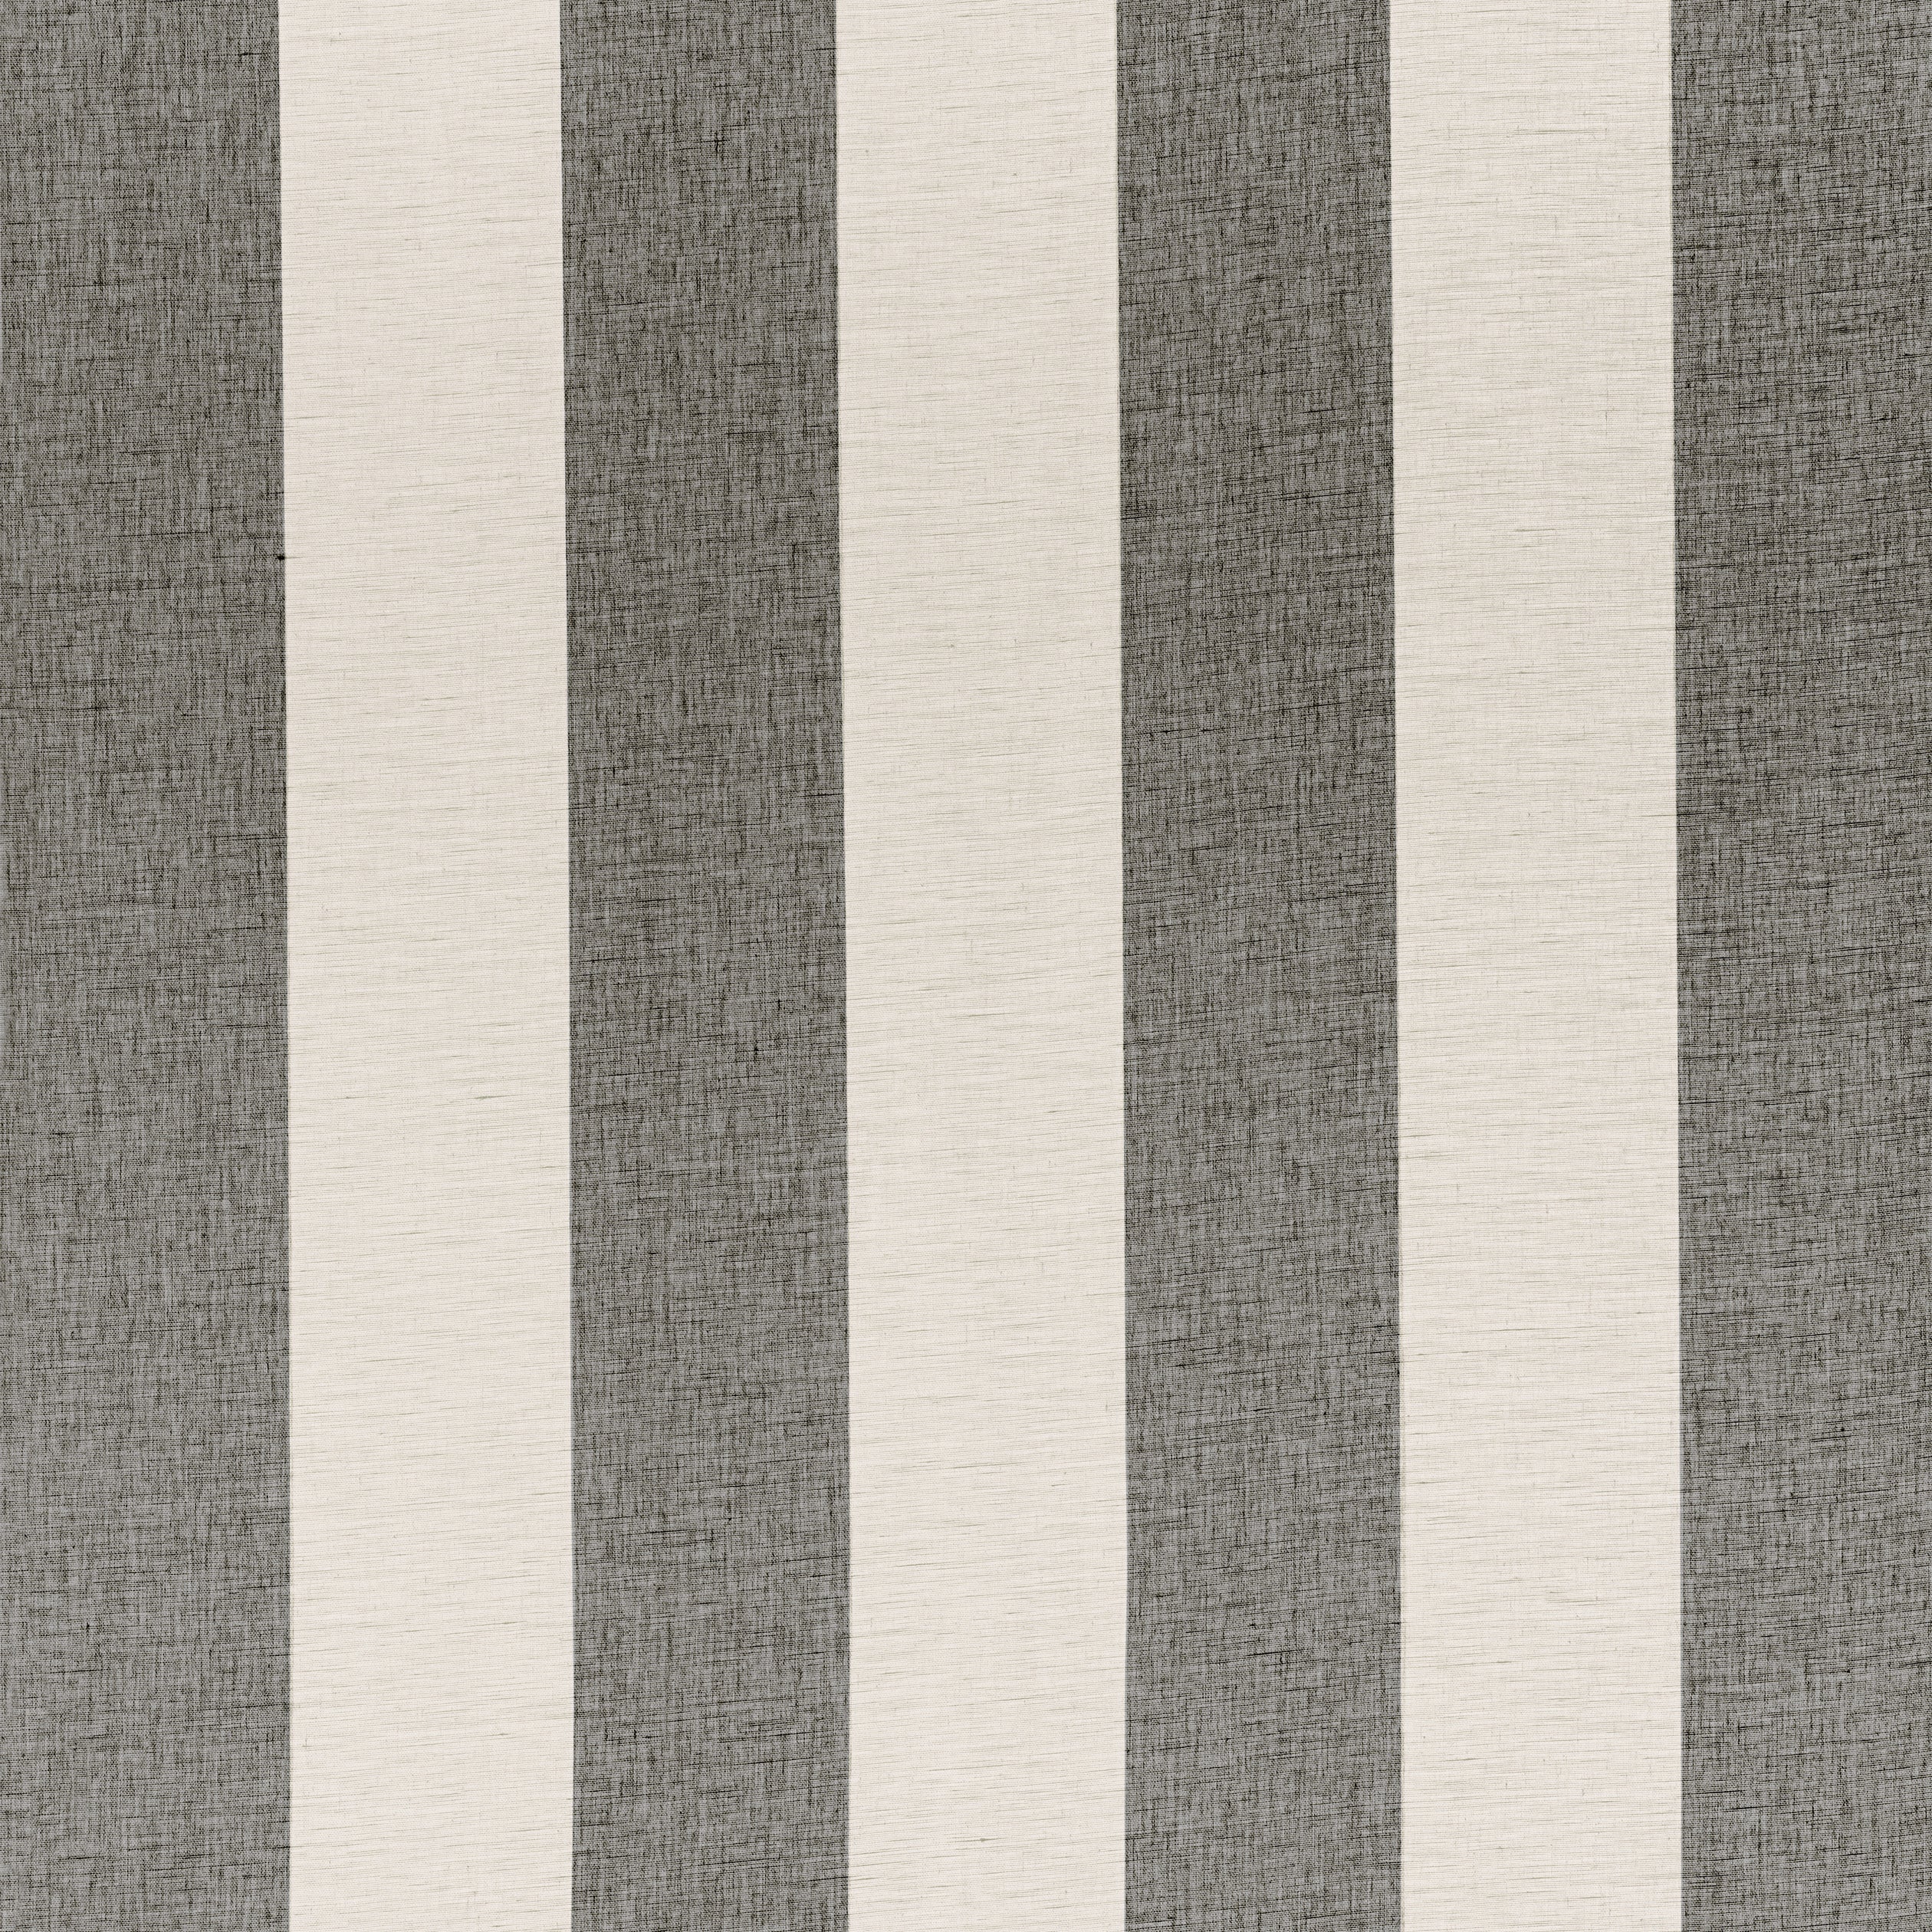 Newport Stripe fabric in black and linen color - pattern number FWW8216 - by Thibaut in the Aura collection